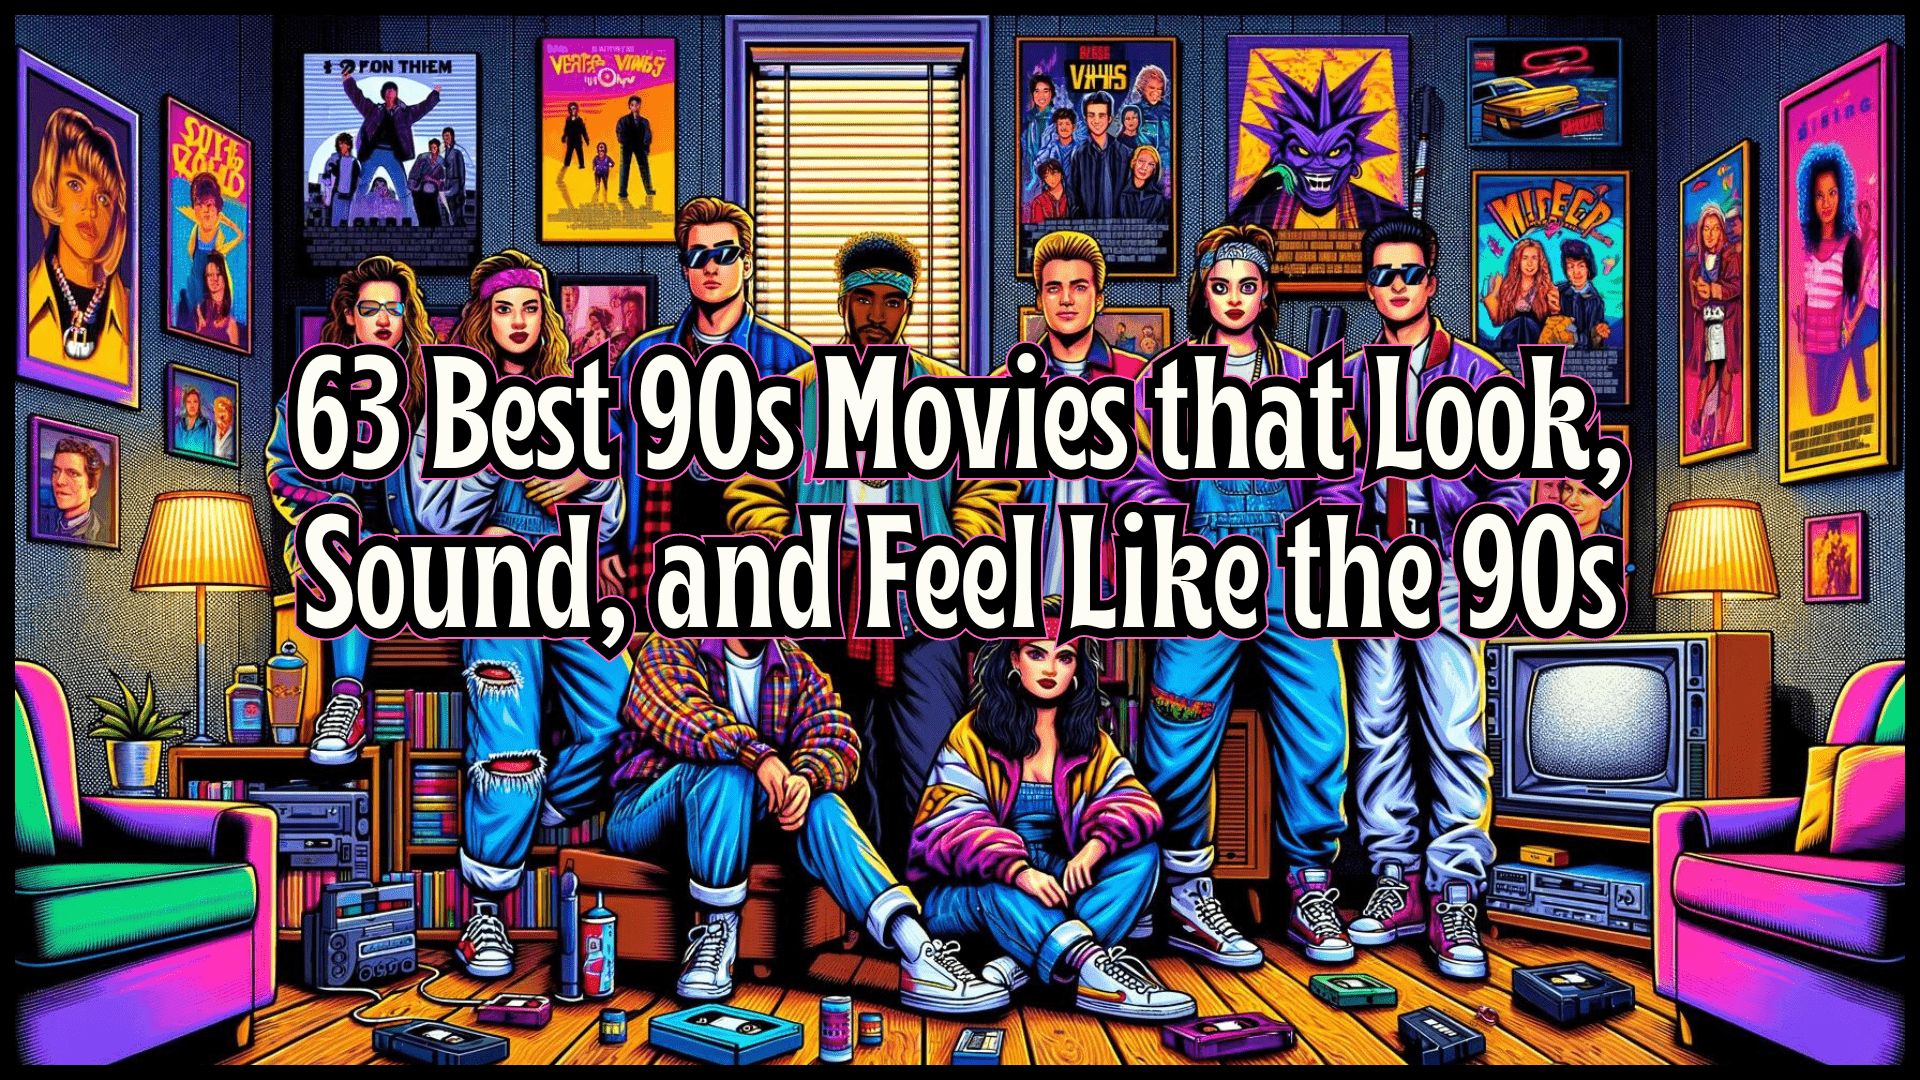 63 Best 90s Movies that Look, Sound, and Feel Like the 90s